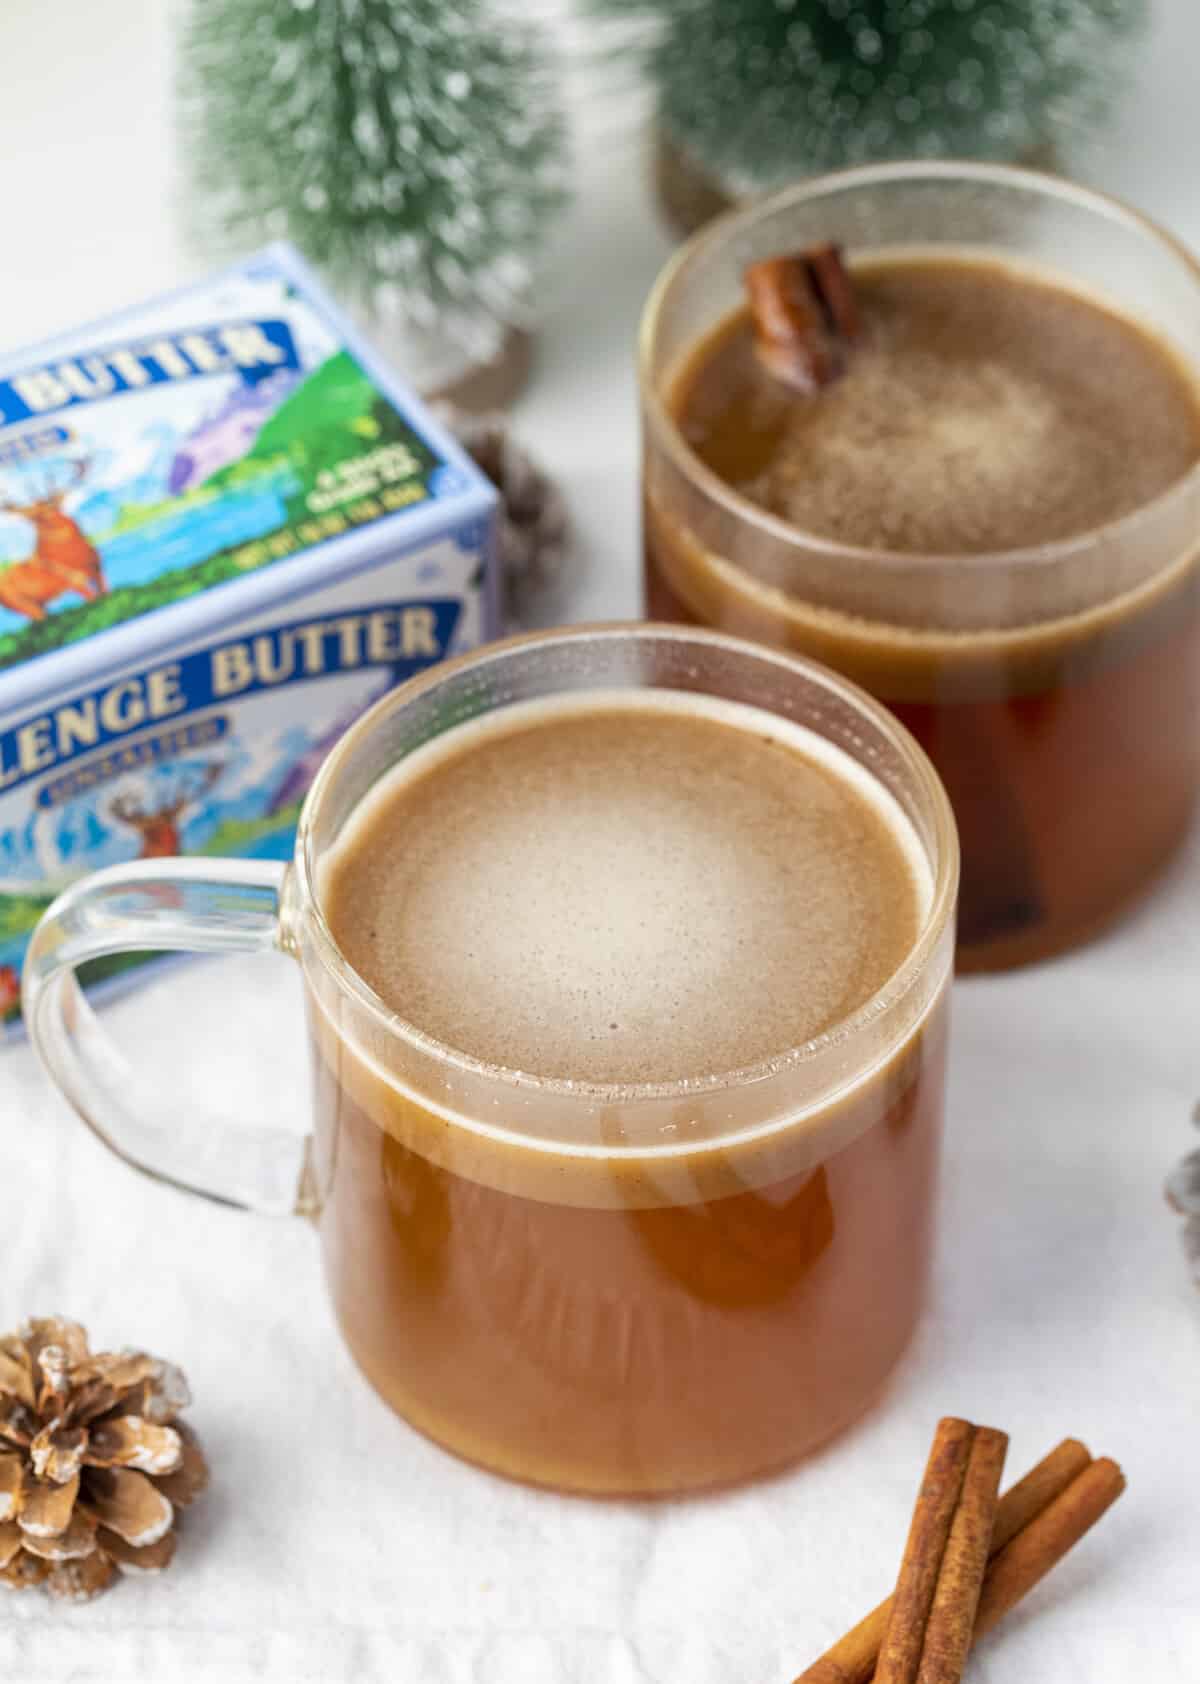 Glasses of Hot Buttered Rum with Challenge Butter.